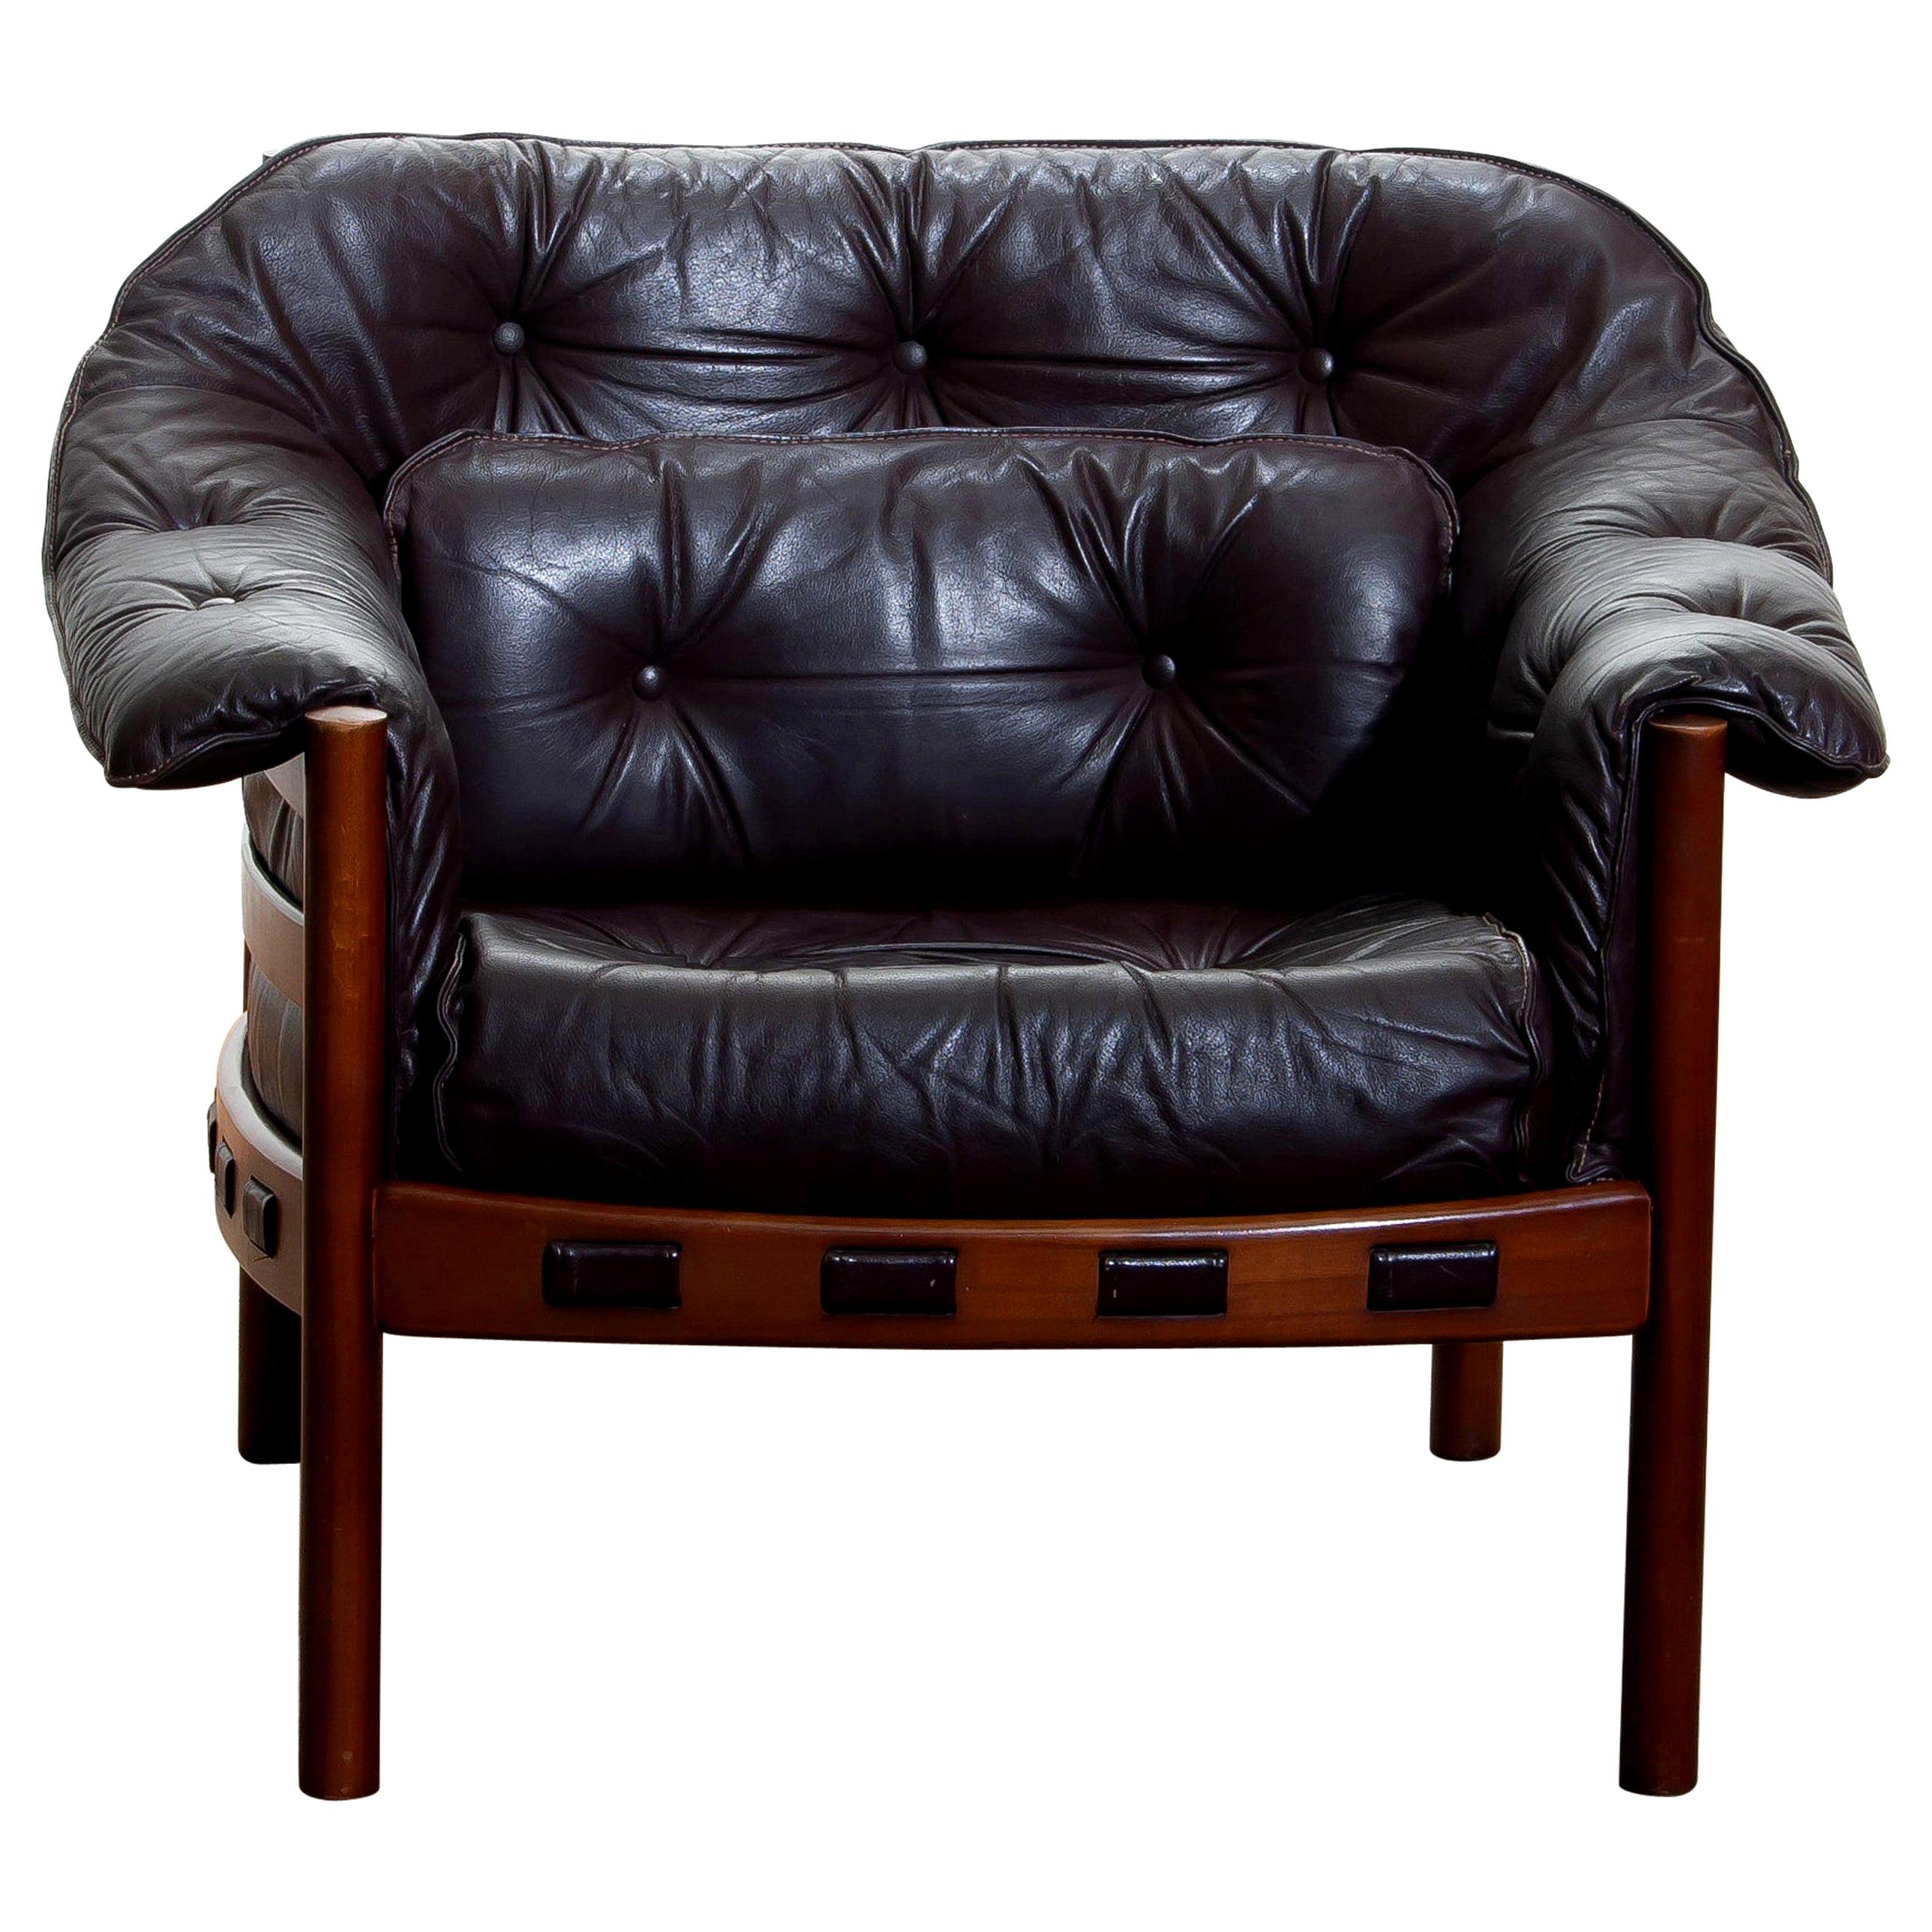 1960s brown leather lounge chair with designed by Arne Norell for Coja, Sweden.
This lounge chair is in, overall, good condition.
  